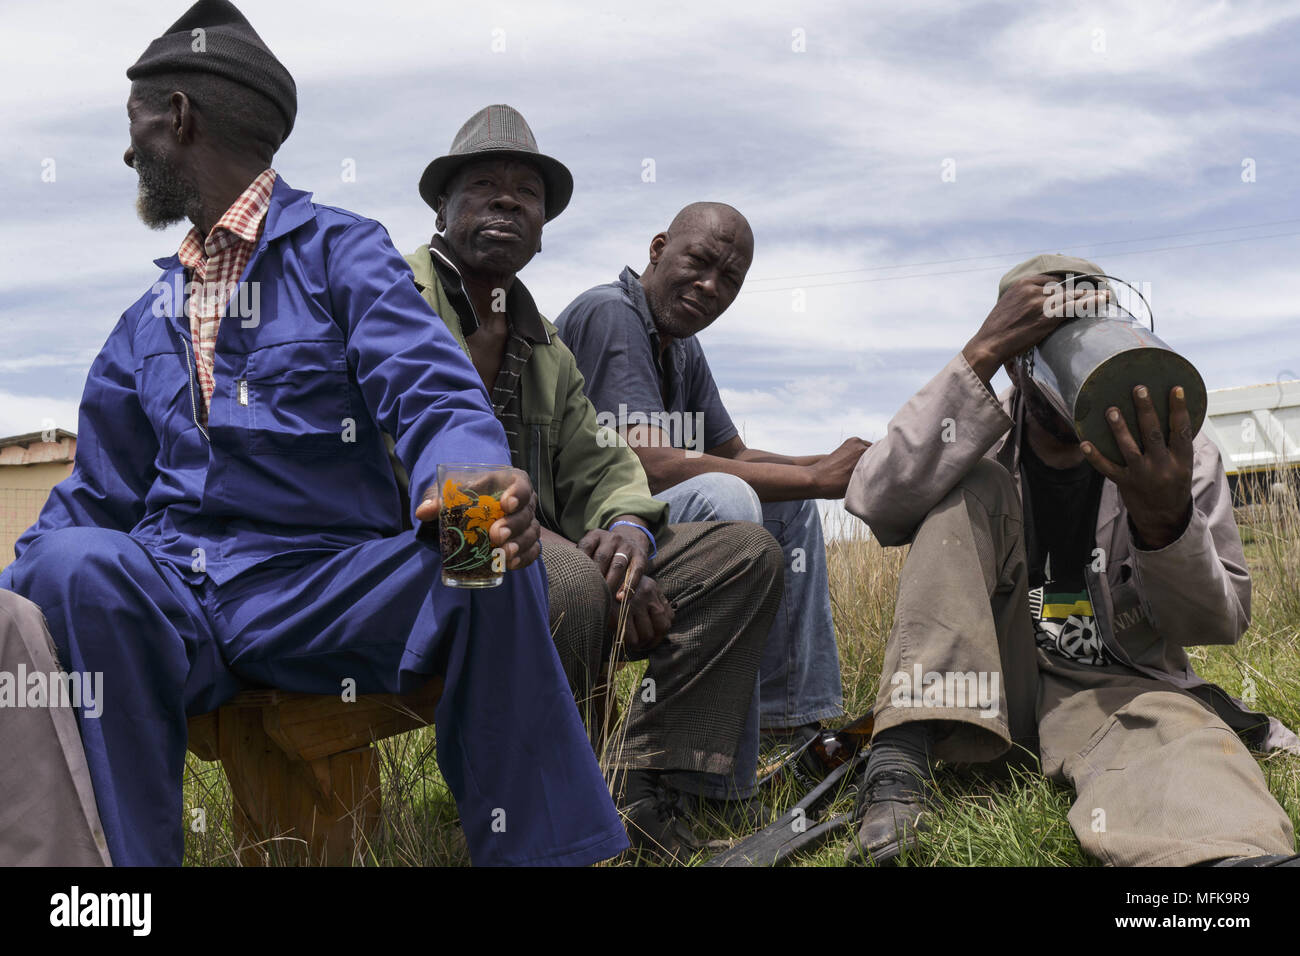 Matatiele, Eastern Cape, South Africa. 2nd Dec, 2017. Xhosa men sit together and drink traditional home made beer. Credit: Stefan Kleinowitz/ZUMA Wire/Alamy Live News Stock Photo